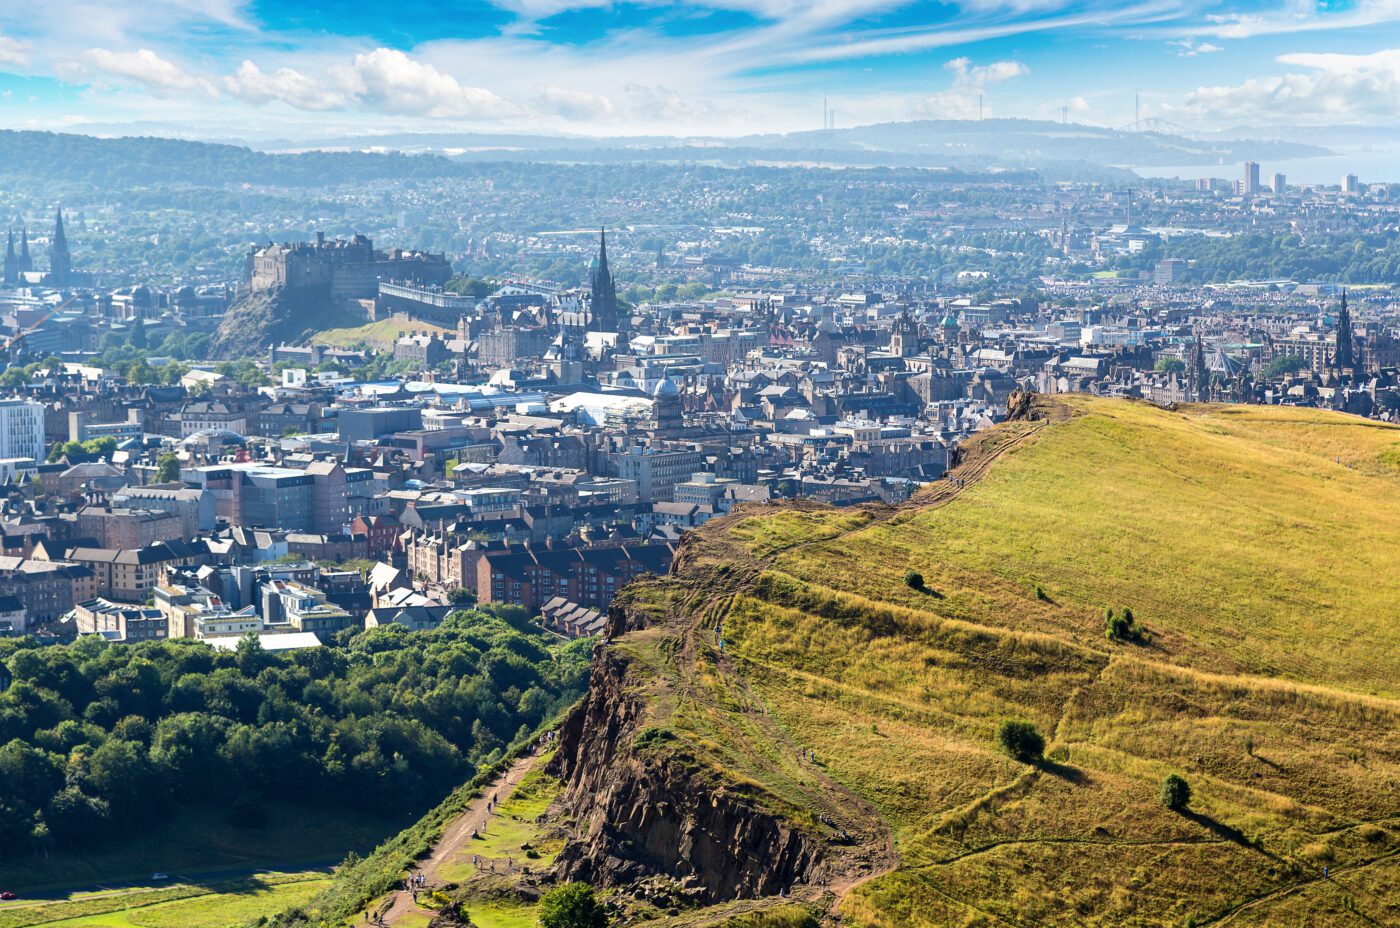 Views of Edinburgh from Arthur's Seat, a extinct Volcano on the edge of the city. This historical landmark is featured in One Day Netflix.